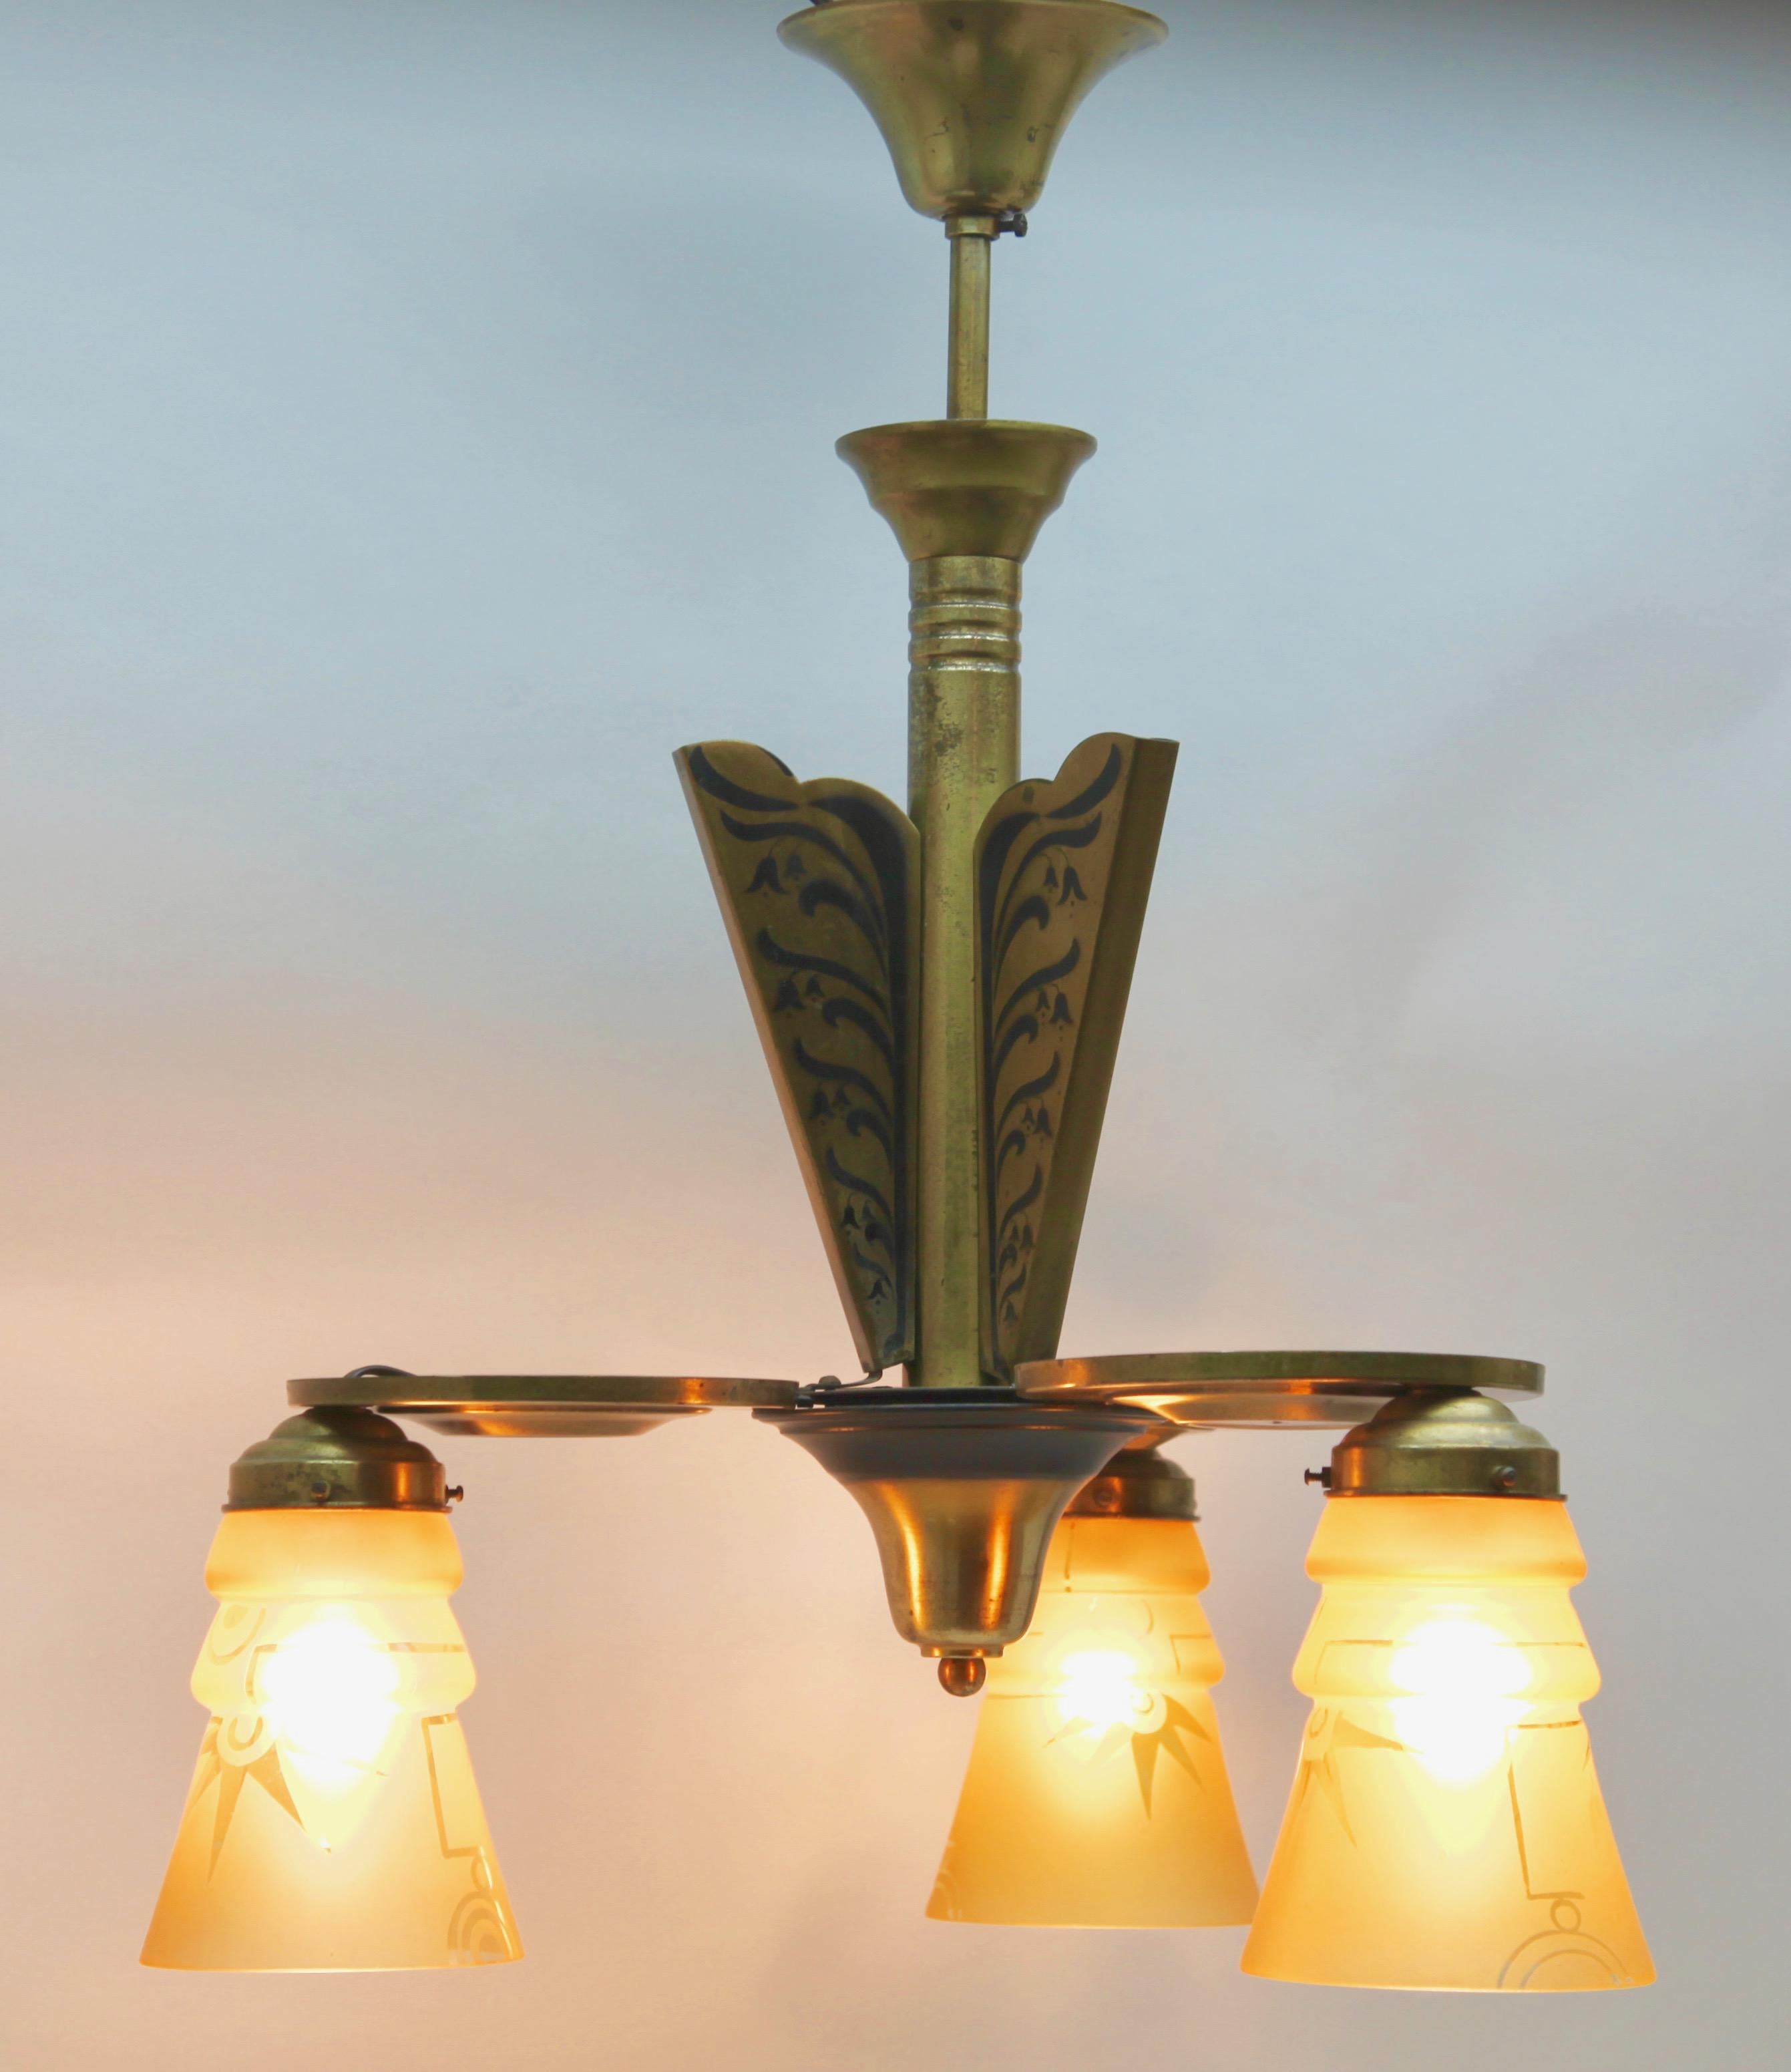 Art Deco Brass Chandelier Three Arms Glass Lampshades Whit Pattern For Sale 4